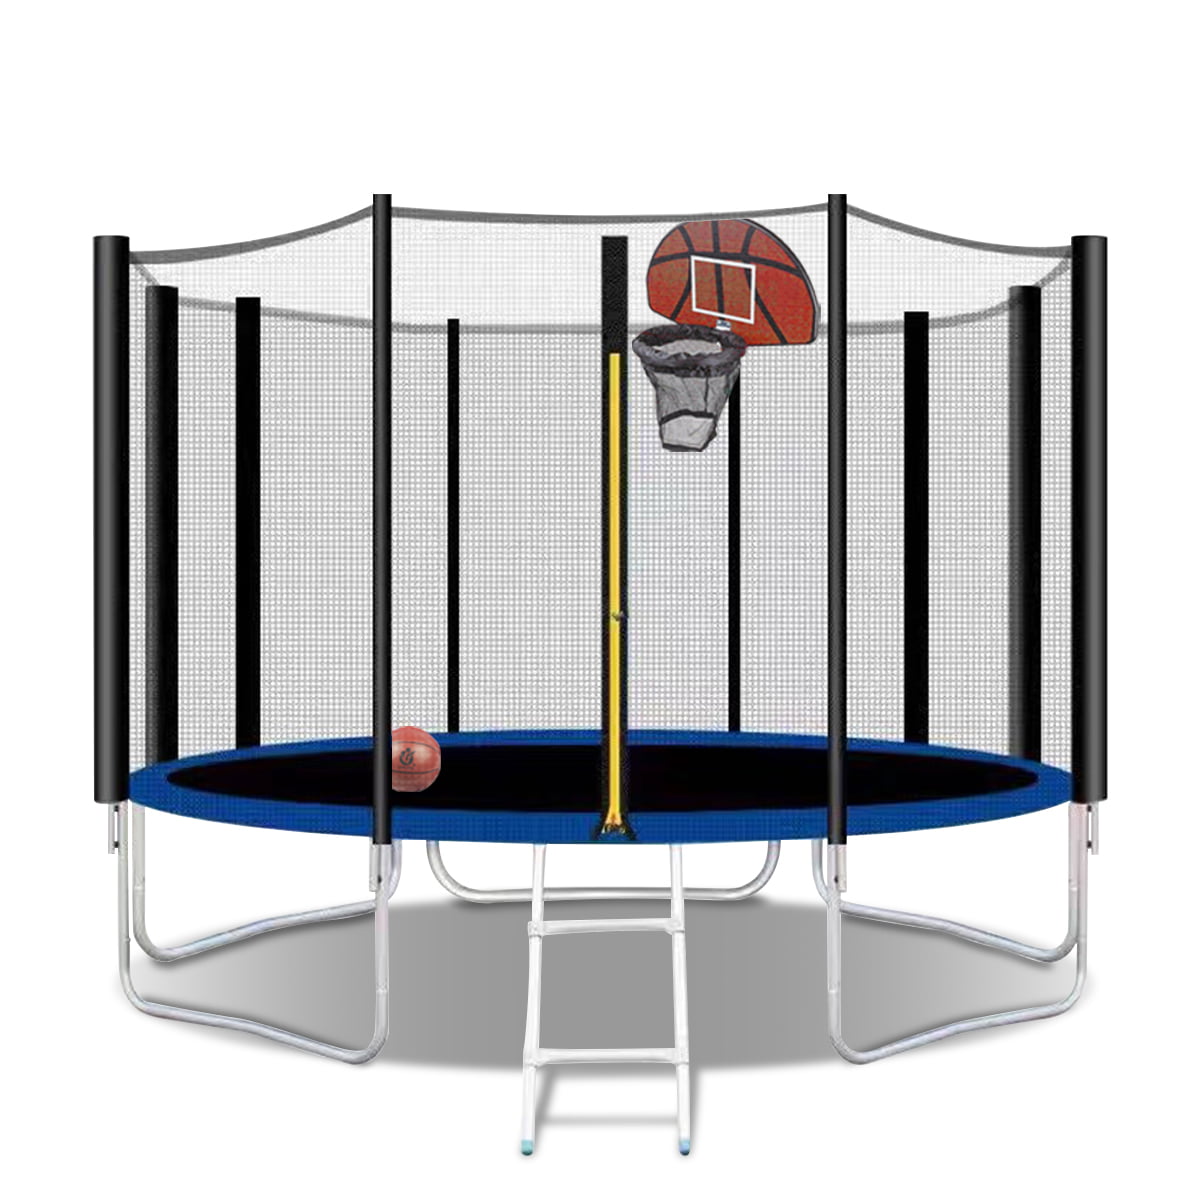 12 FT Outdoor Trampoline for Backyard, Outdoor Trampoline with Safety Enclosure Net, Steel Tube, Circular Trampolines for Adults/Kids, Family Jumping and Ladder, Kids Round Trampoline, Q17171